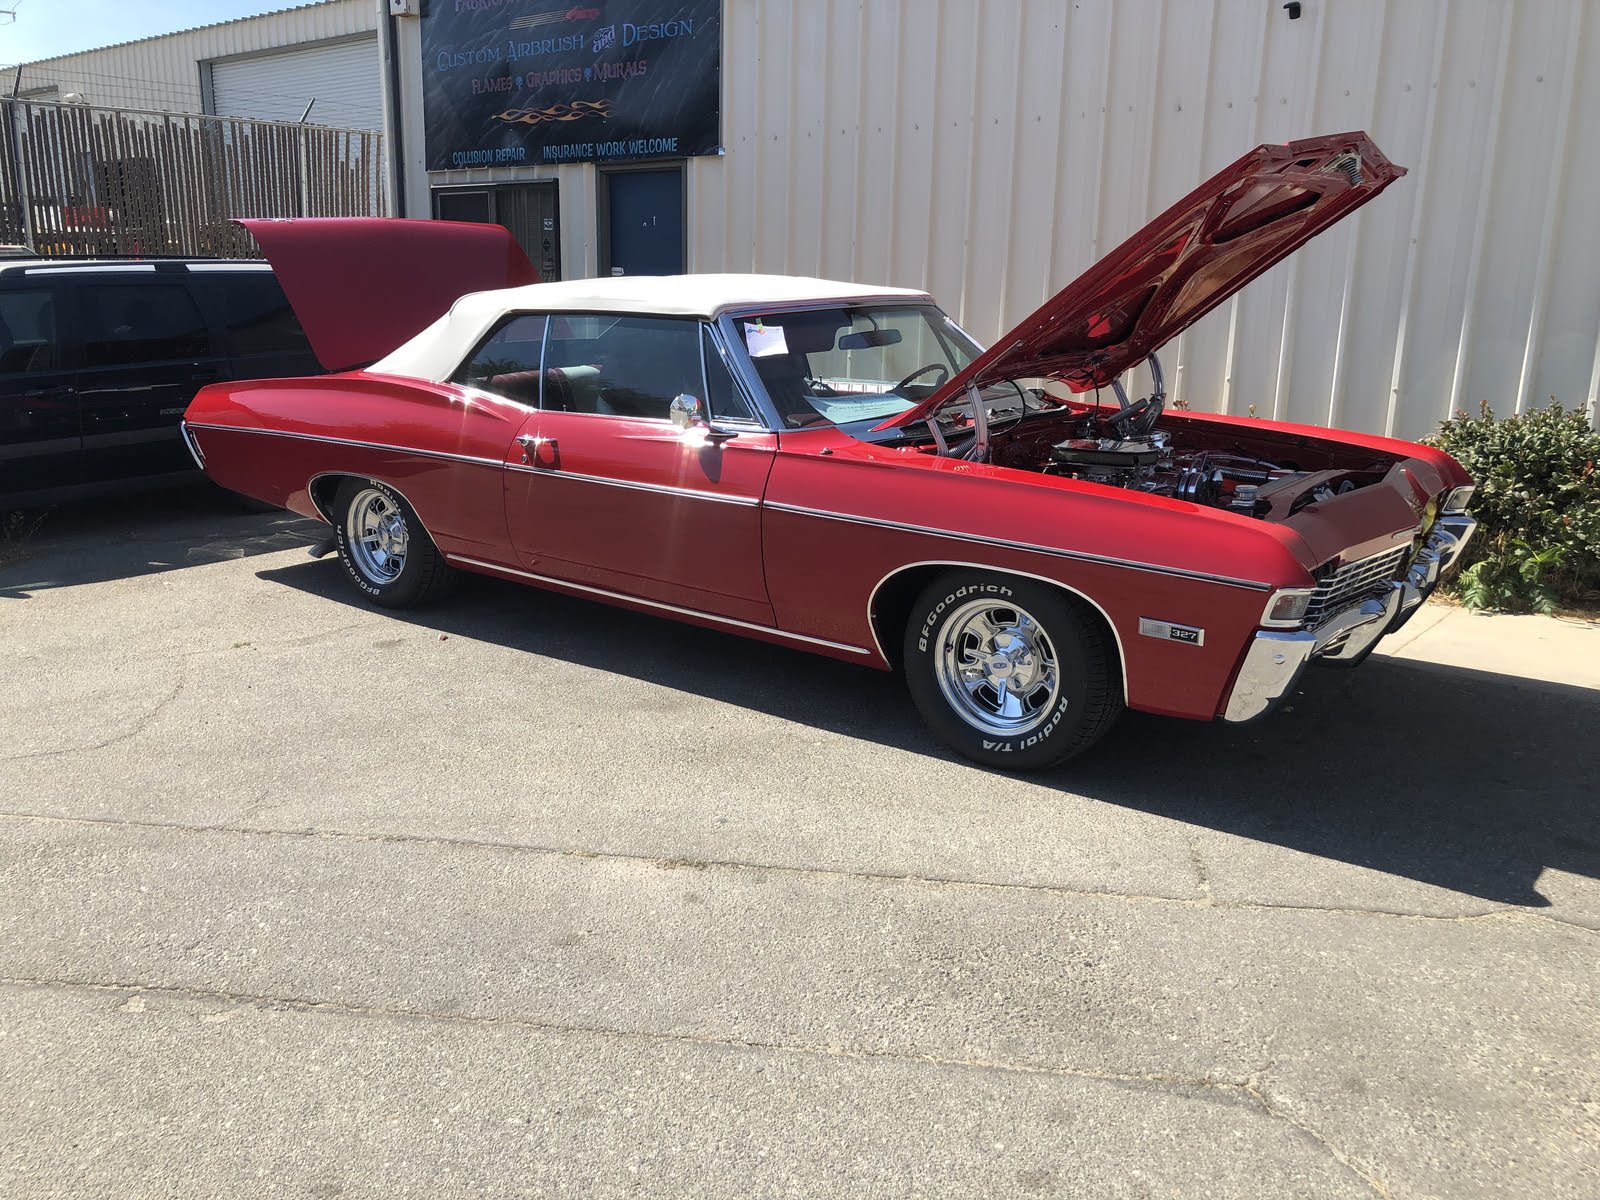 Chevrolet Impala Questions How Much Is A 4 Door 1968 Impala With A 396 Ci Engine And Origin Cargurus